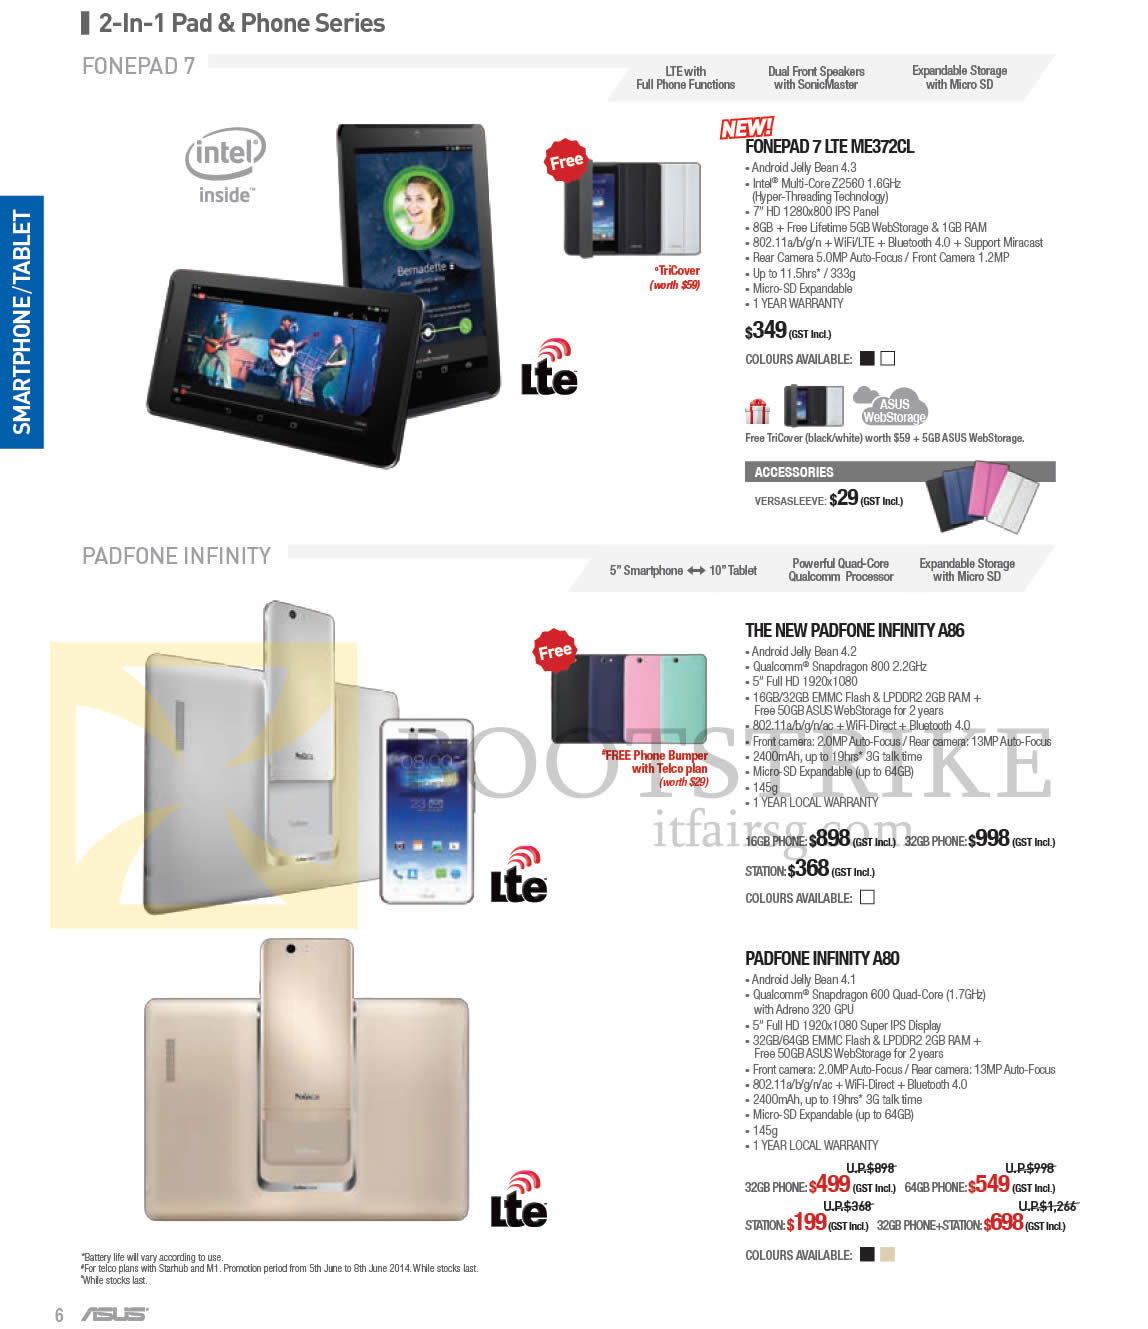 PC SHOW 2014 price list image brochure of ASUS Tablets Fonepad 7 ME372CL, Padfone Infinity A86, A80